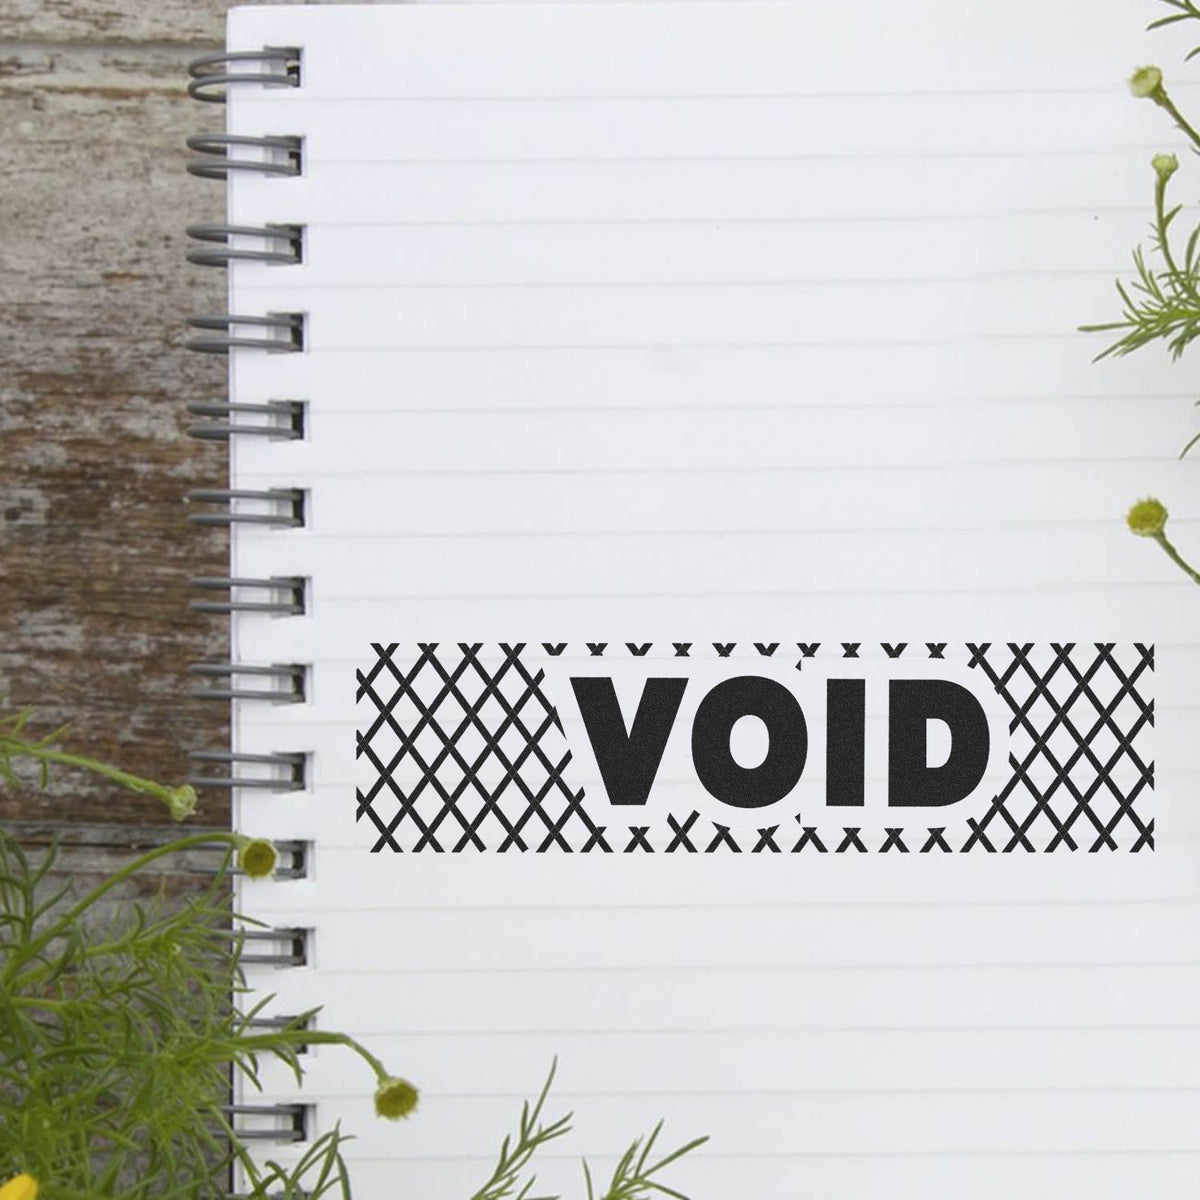 Void with Strikelines Rubber Stamp Lifestyle Photo